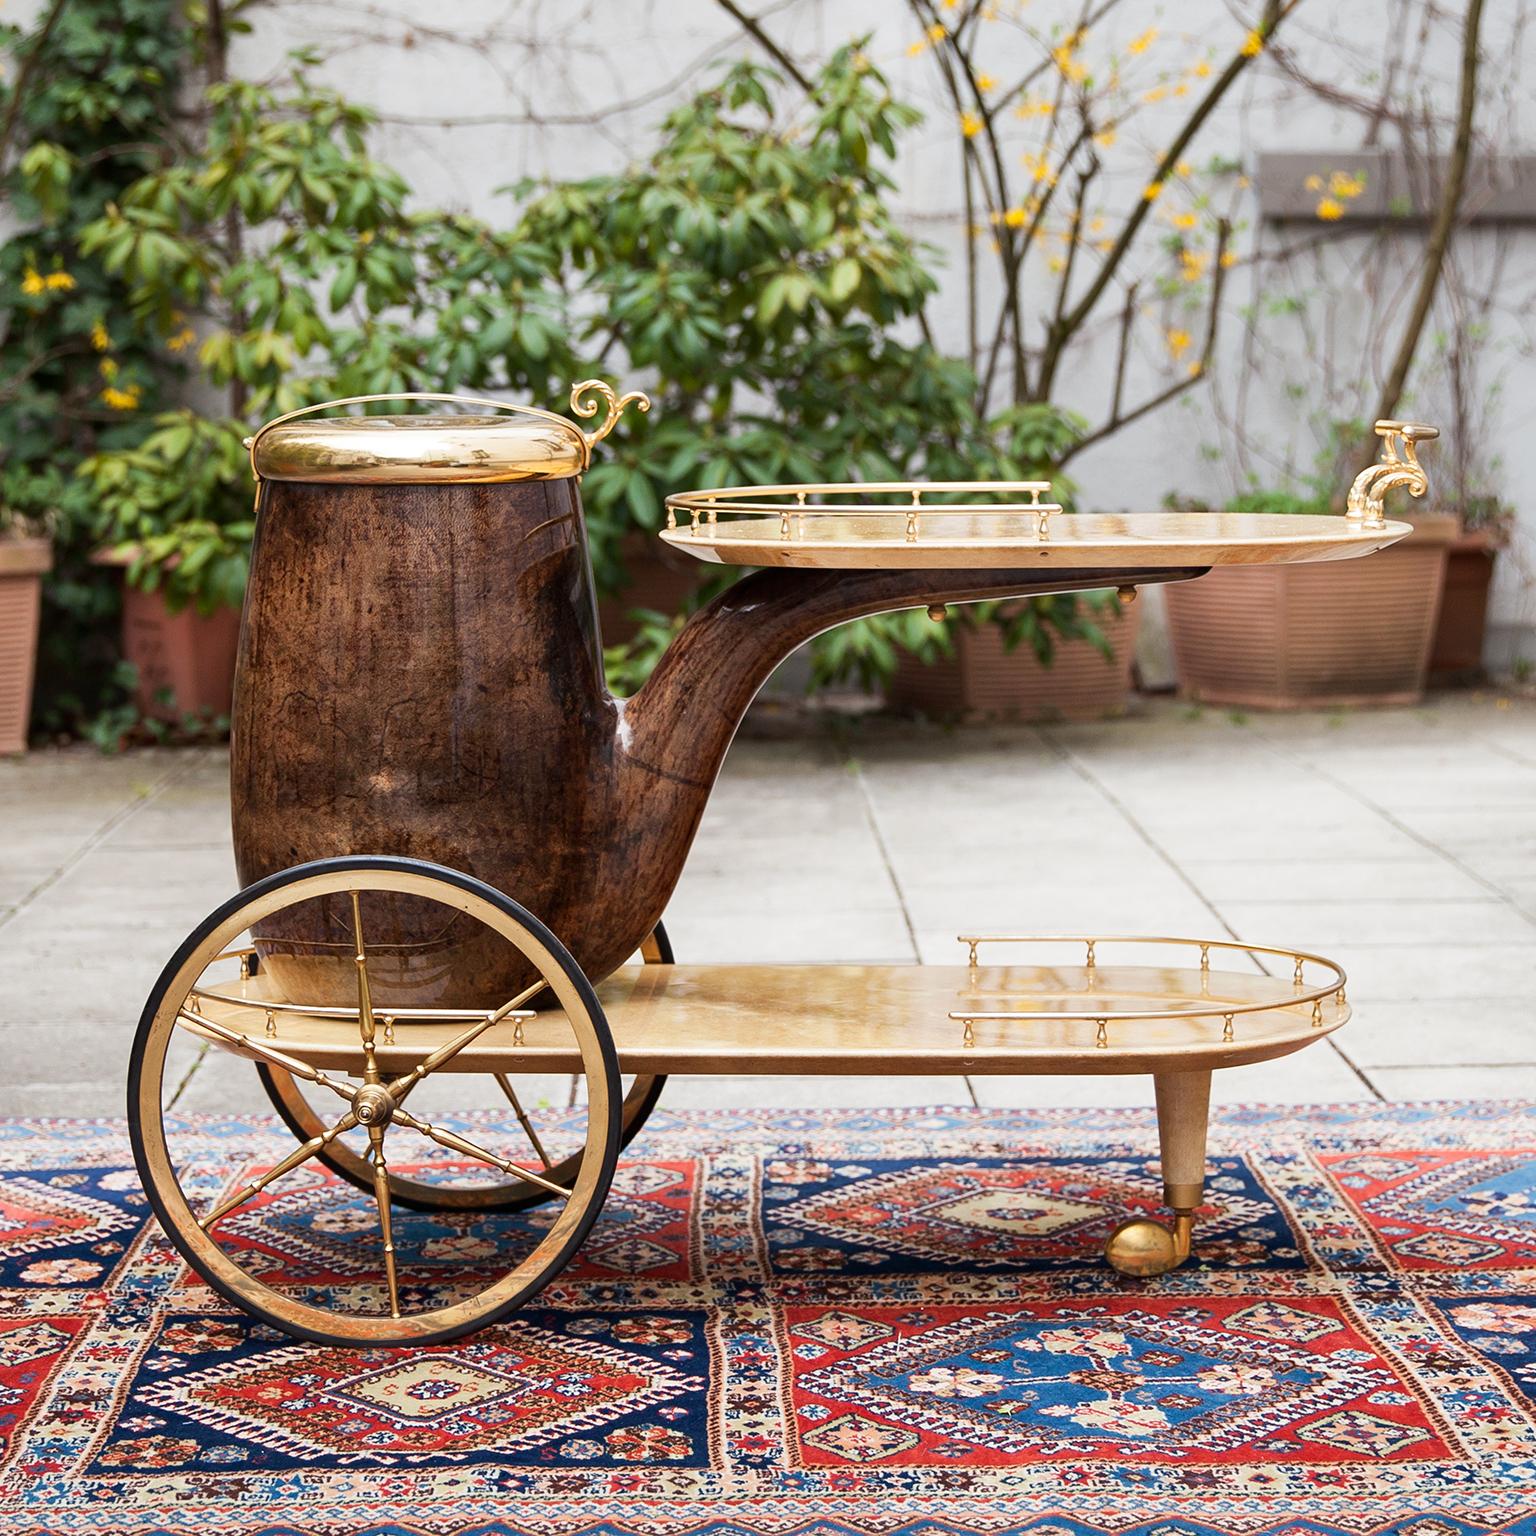 Aldo Tura bar cart in form of a pipe, lacquered in brown and cream goatskin with golden brass applications and a huge container as champagne or wine cooler.
This particular bar cart was executed, circa 1960s and is in very good vintage condition.